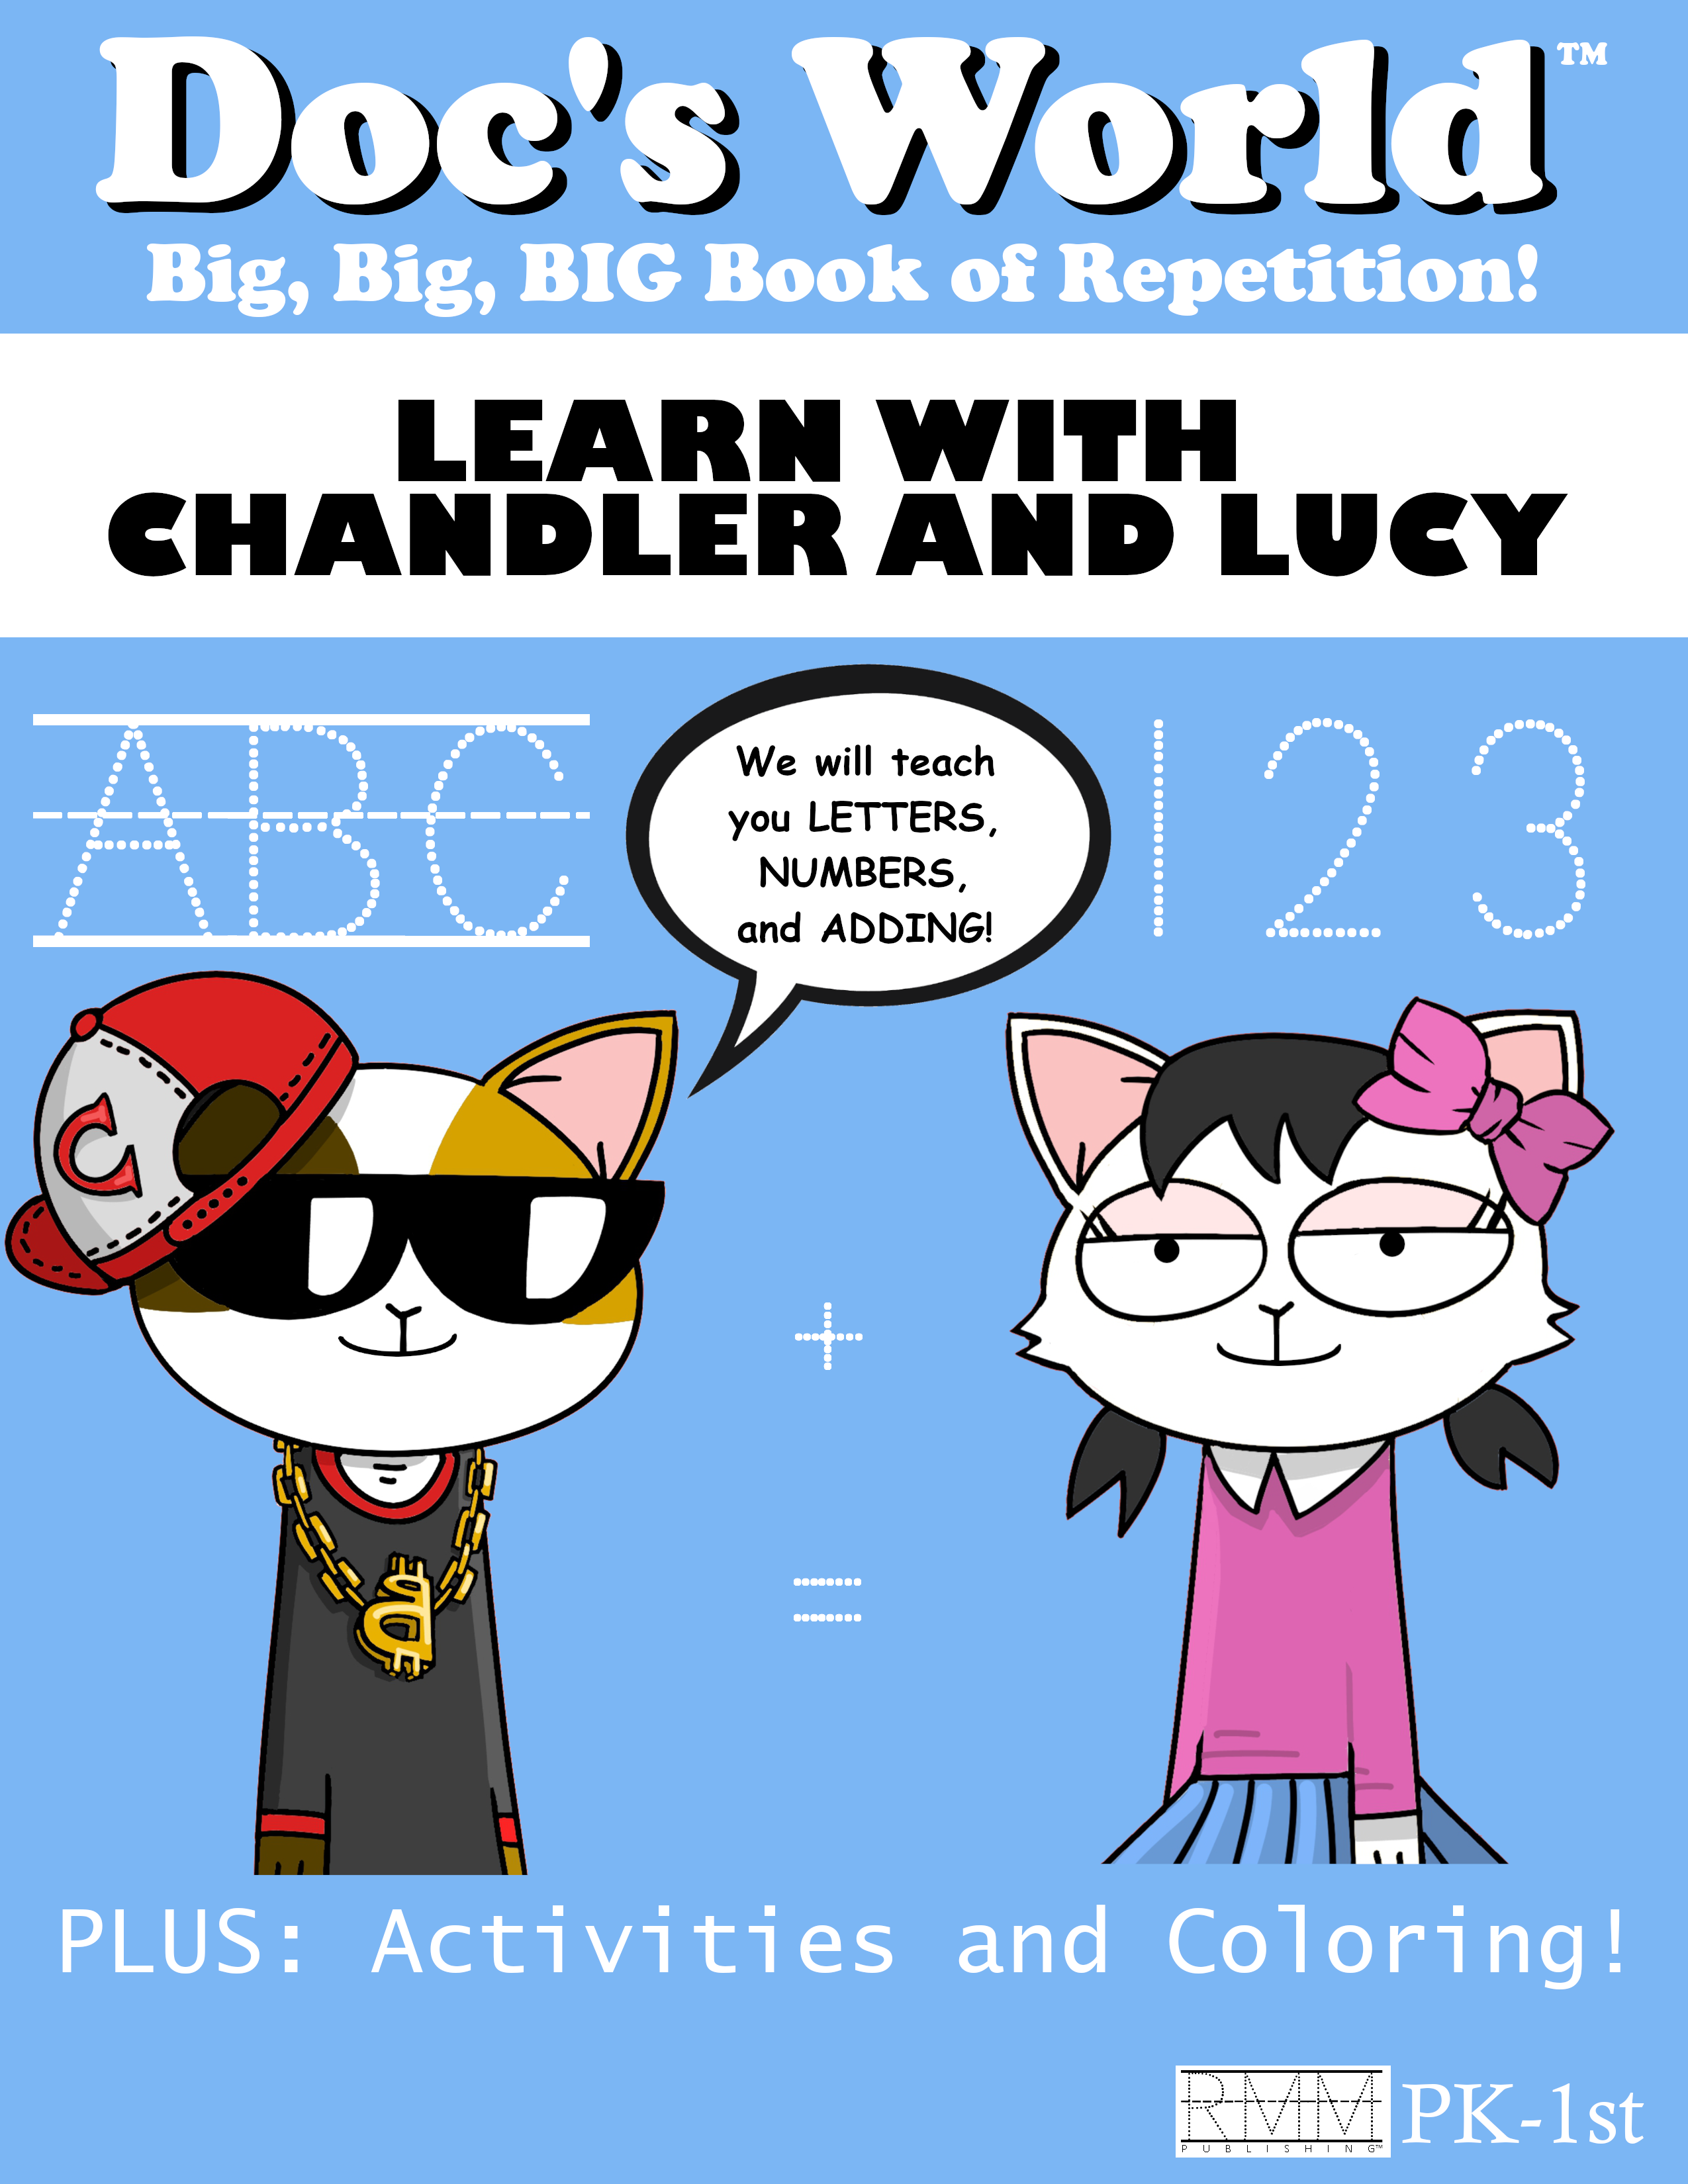 Chandler and Lucy Cover 1